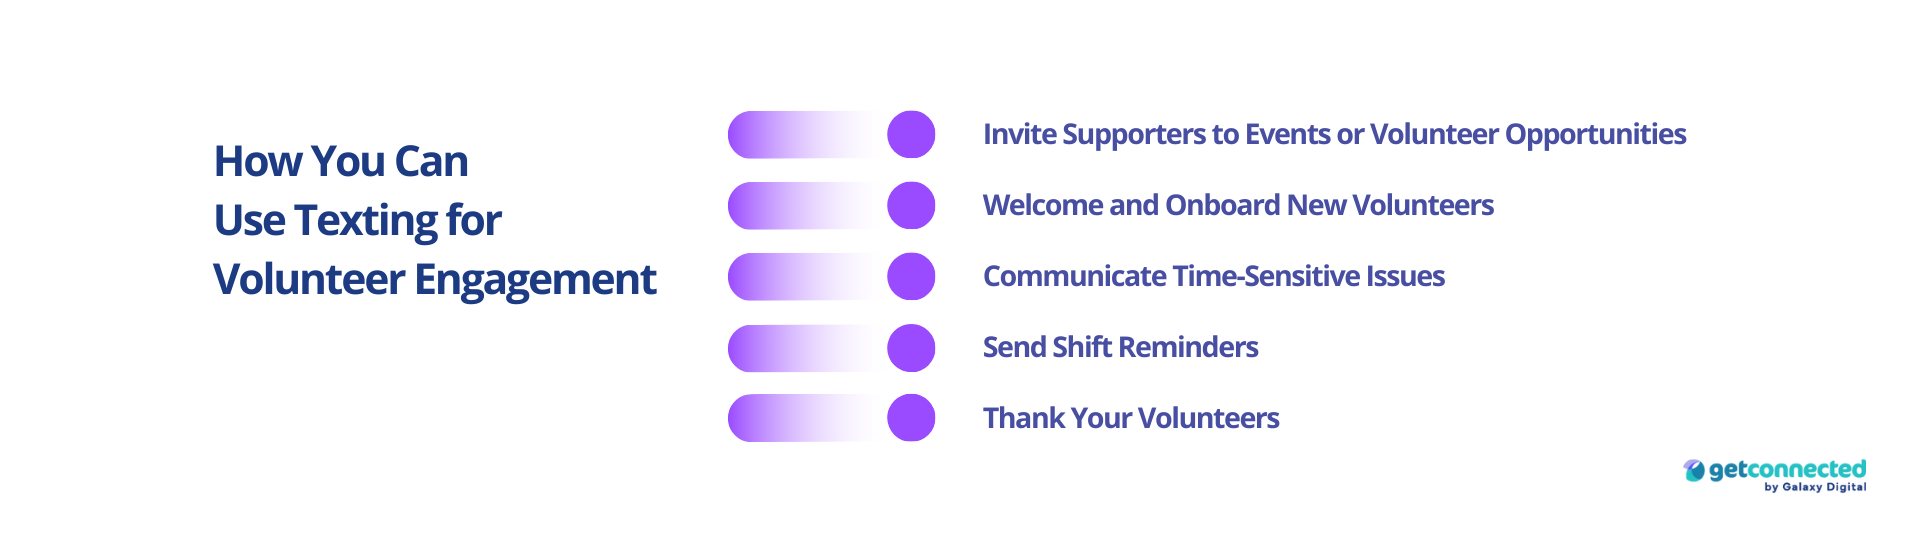 How You Can Use Texting for Volunteer Engagement